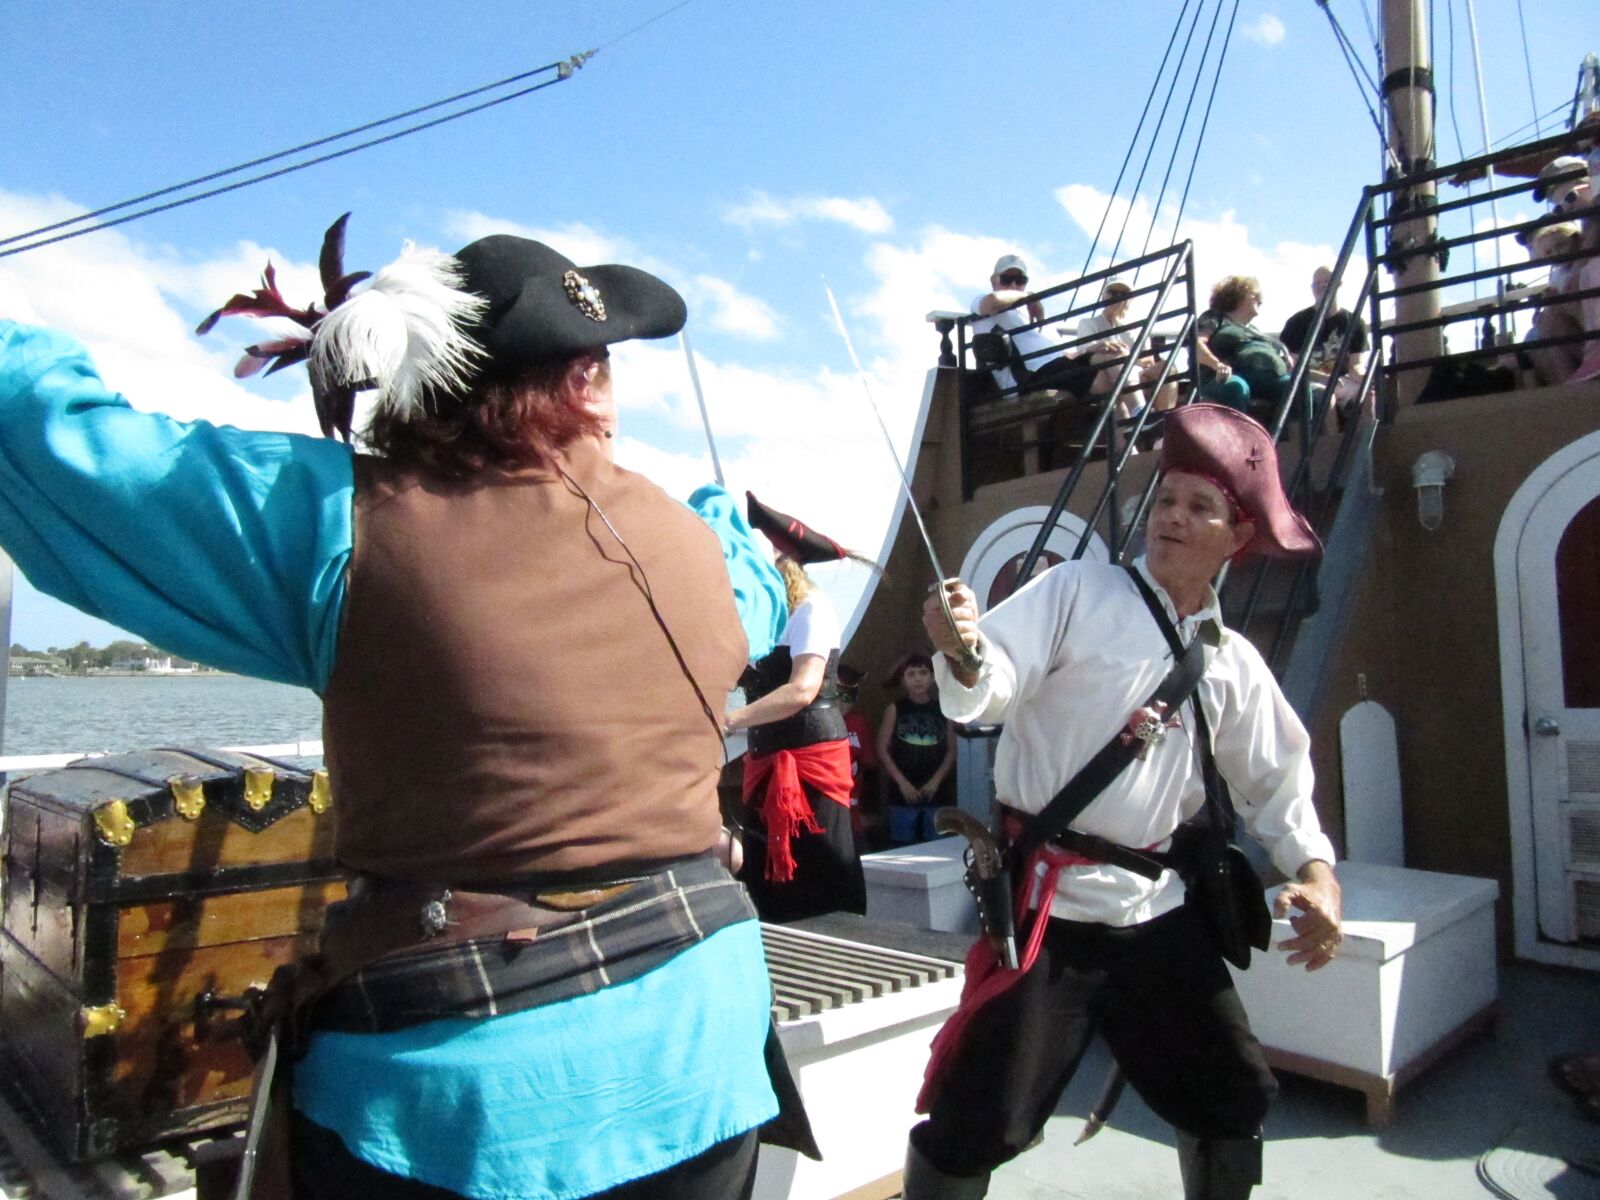 Canon PowerShot SX600 HS sample photo. Pirate, sword fight, sailing photography